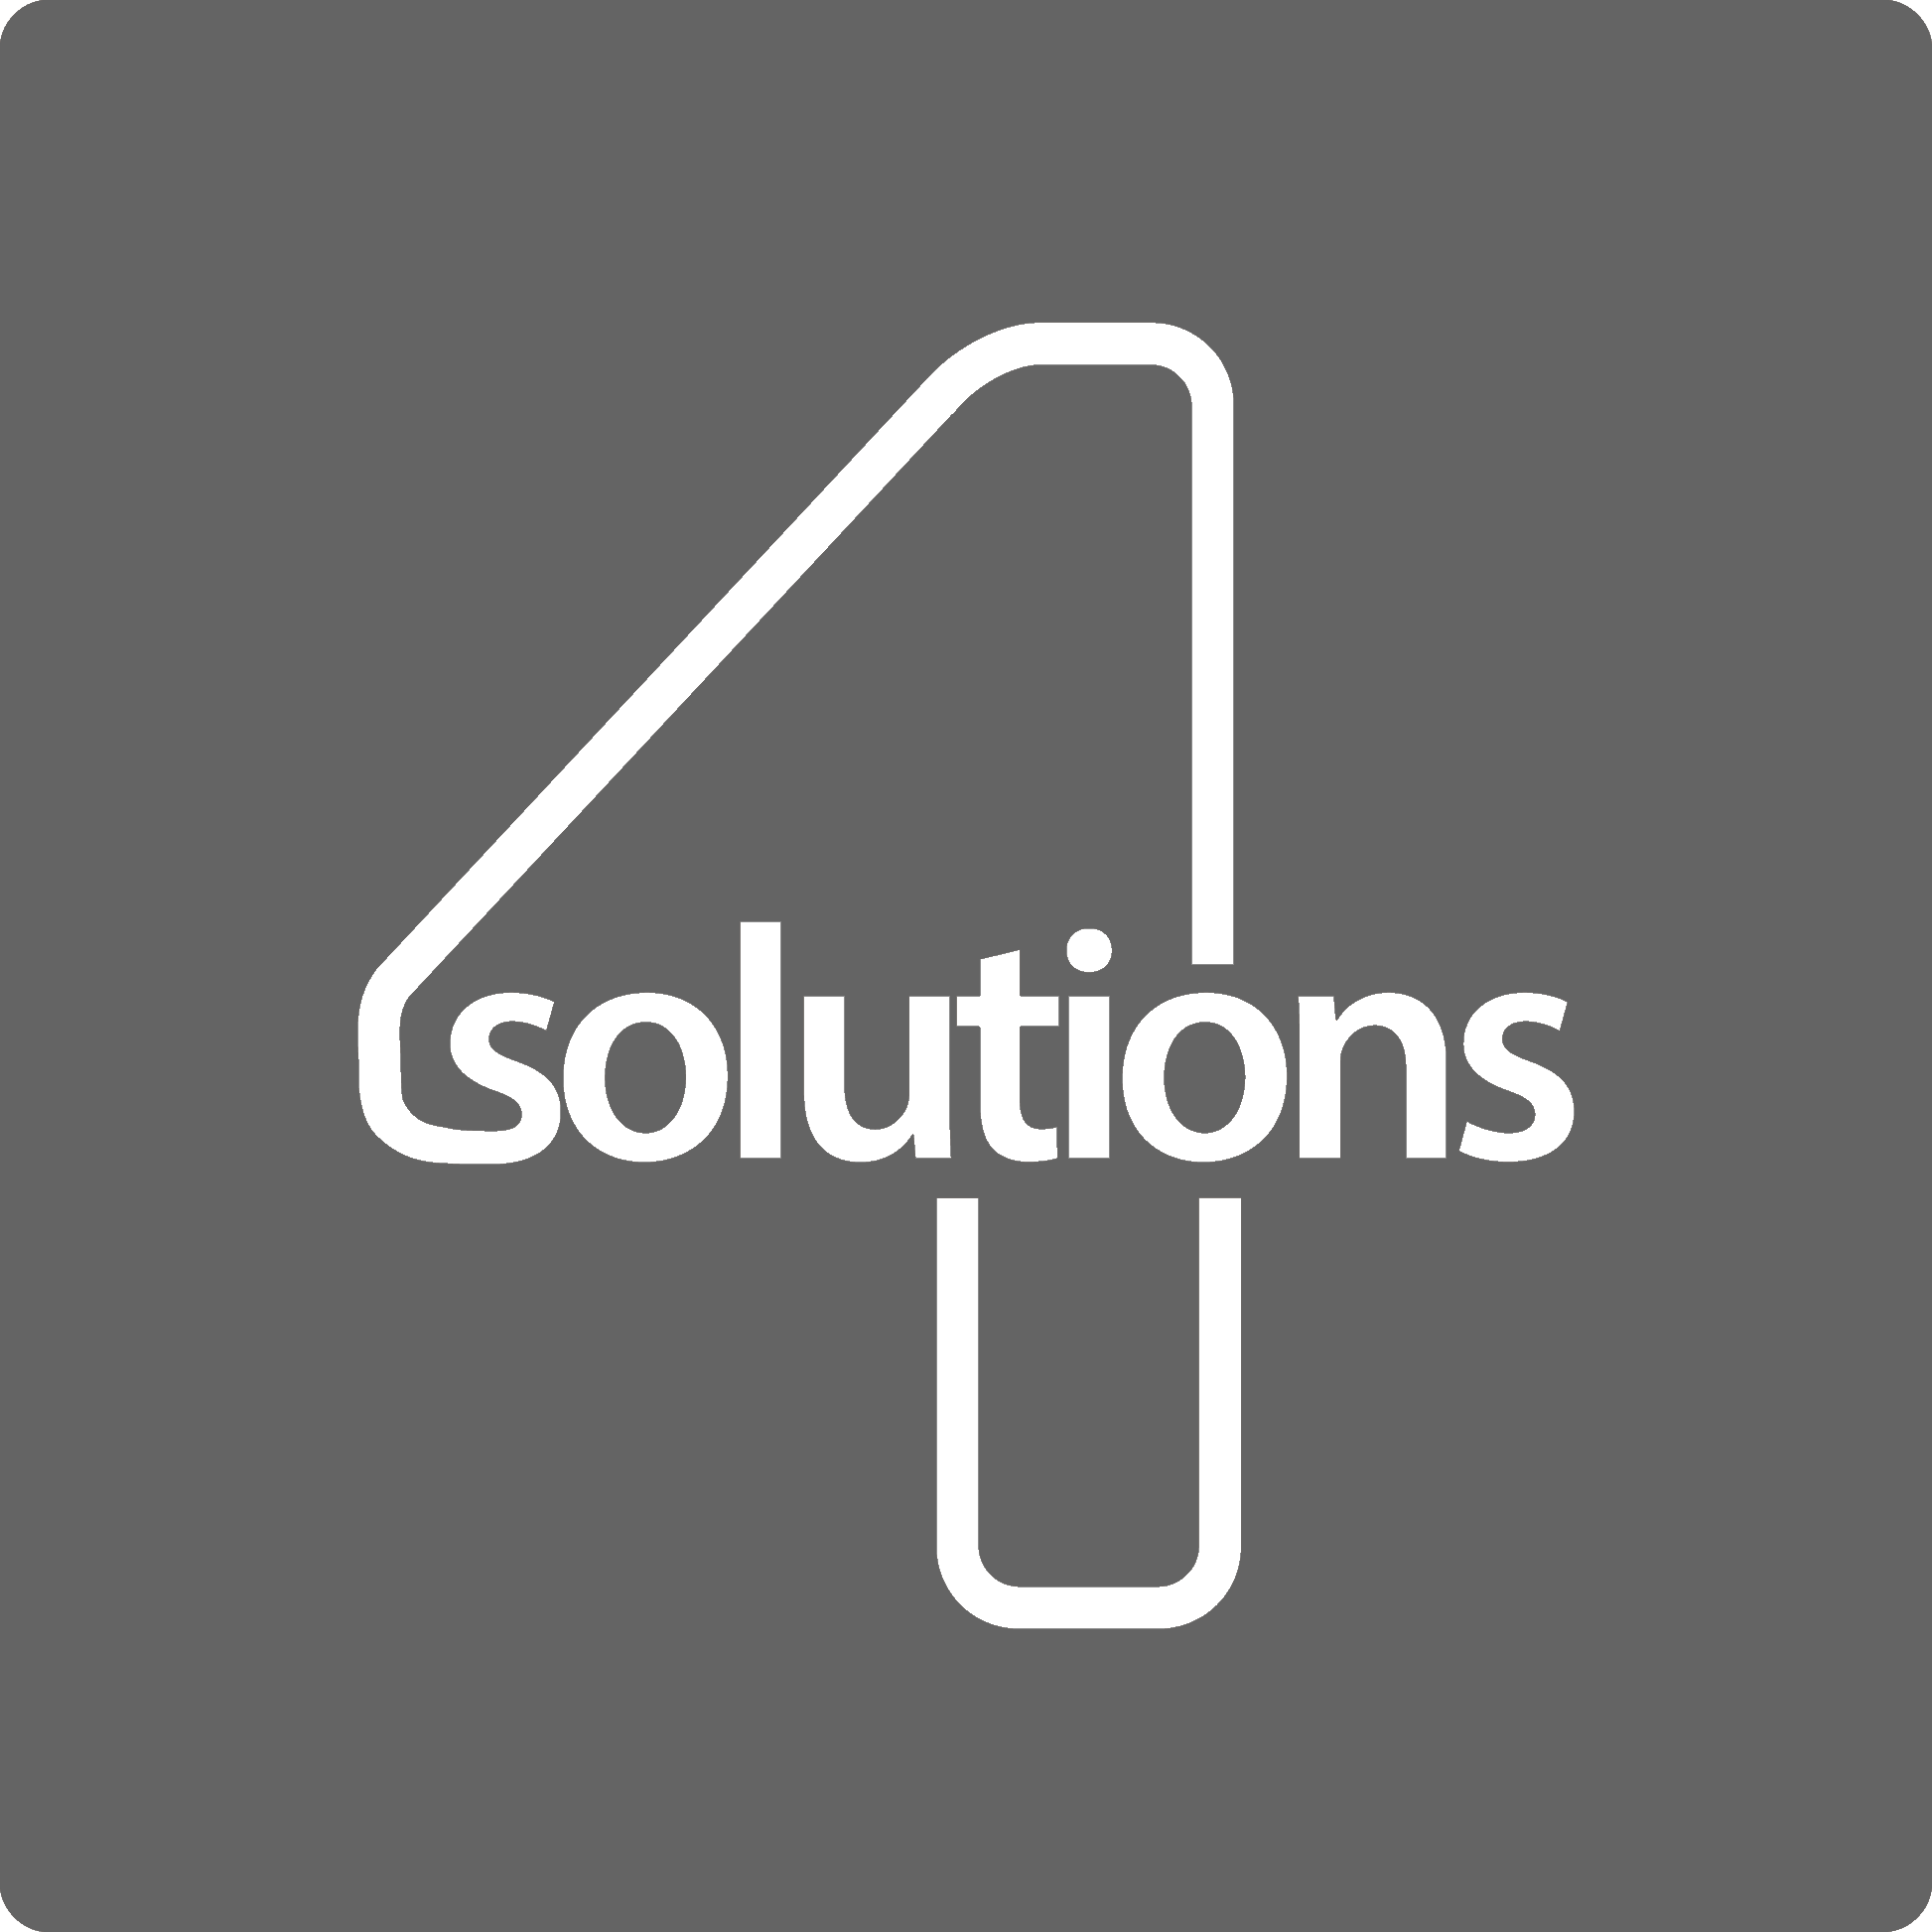 4solutions